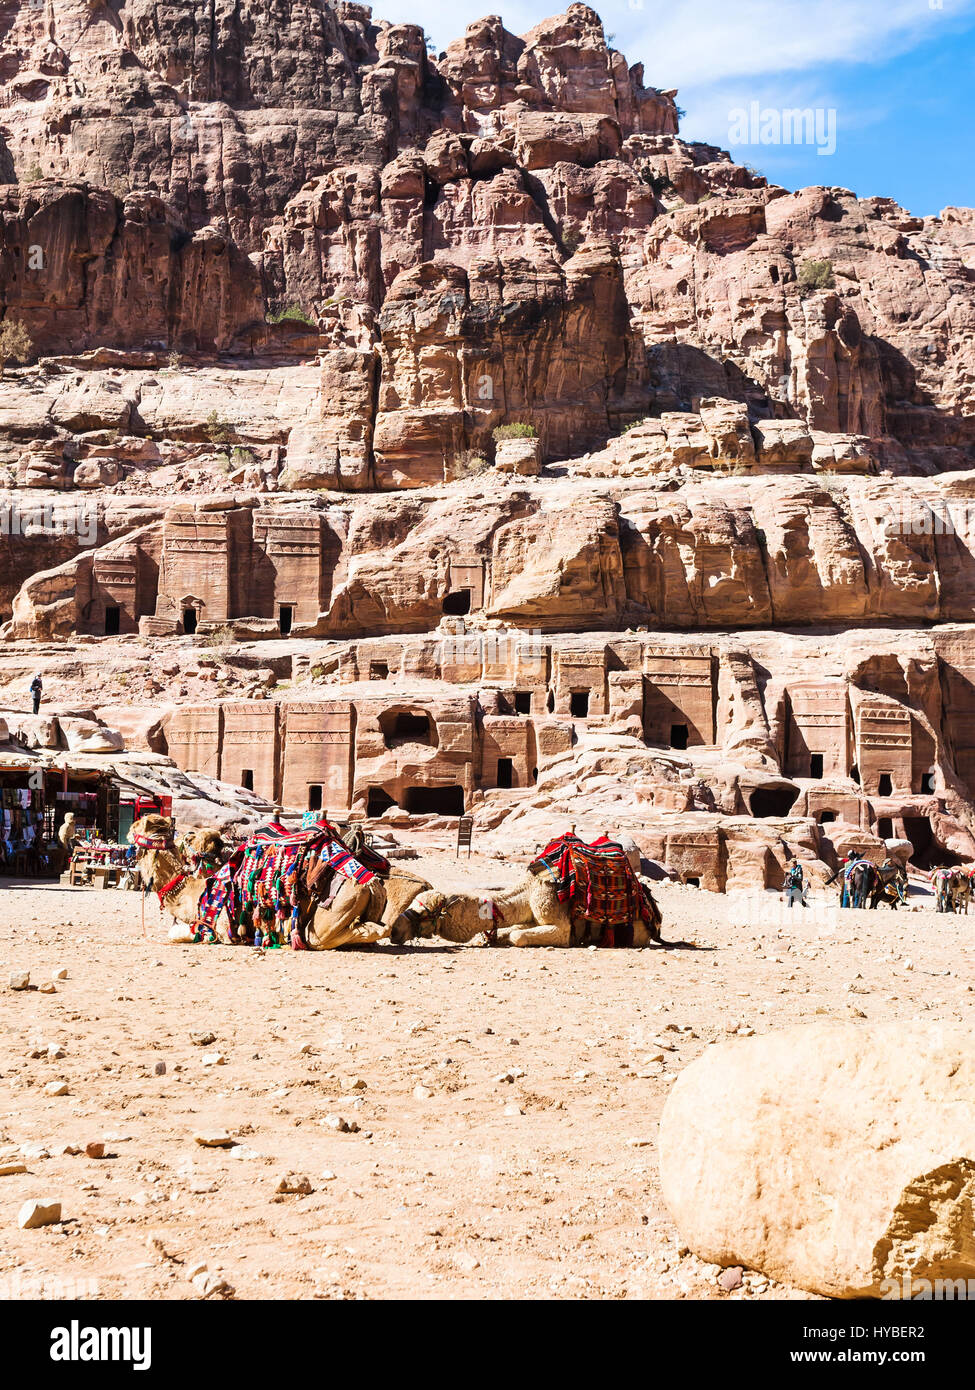 PETRA, JORDAN - FEBRUARY 21, 2012: bedouin camels in ancient Petra town. Rock-cut town Petra was established about 312 BC as the capital city of the A Stock Photo